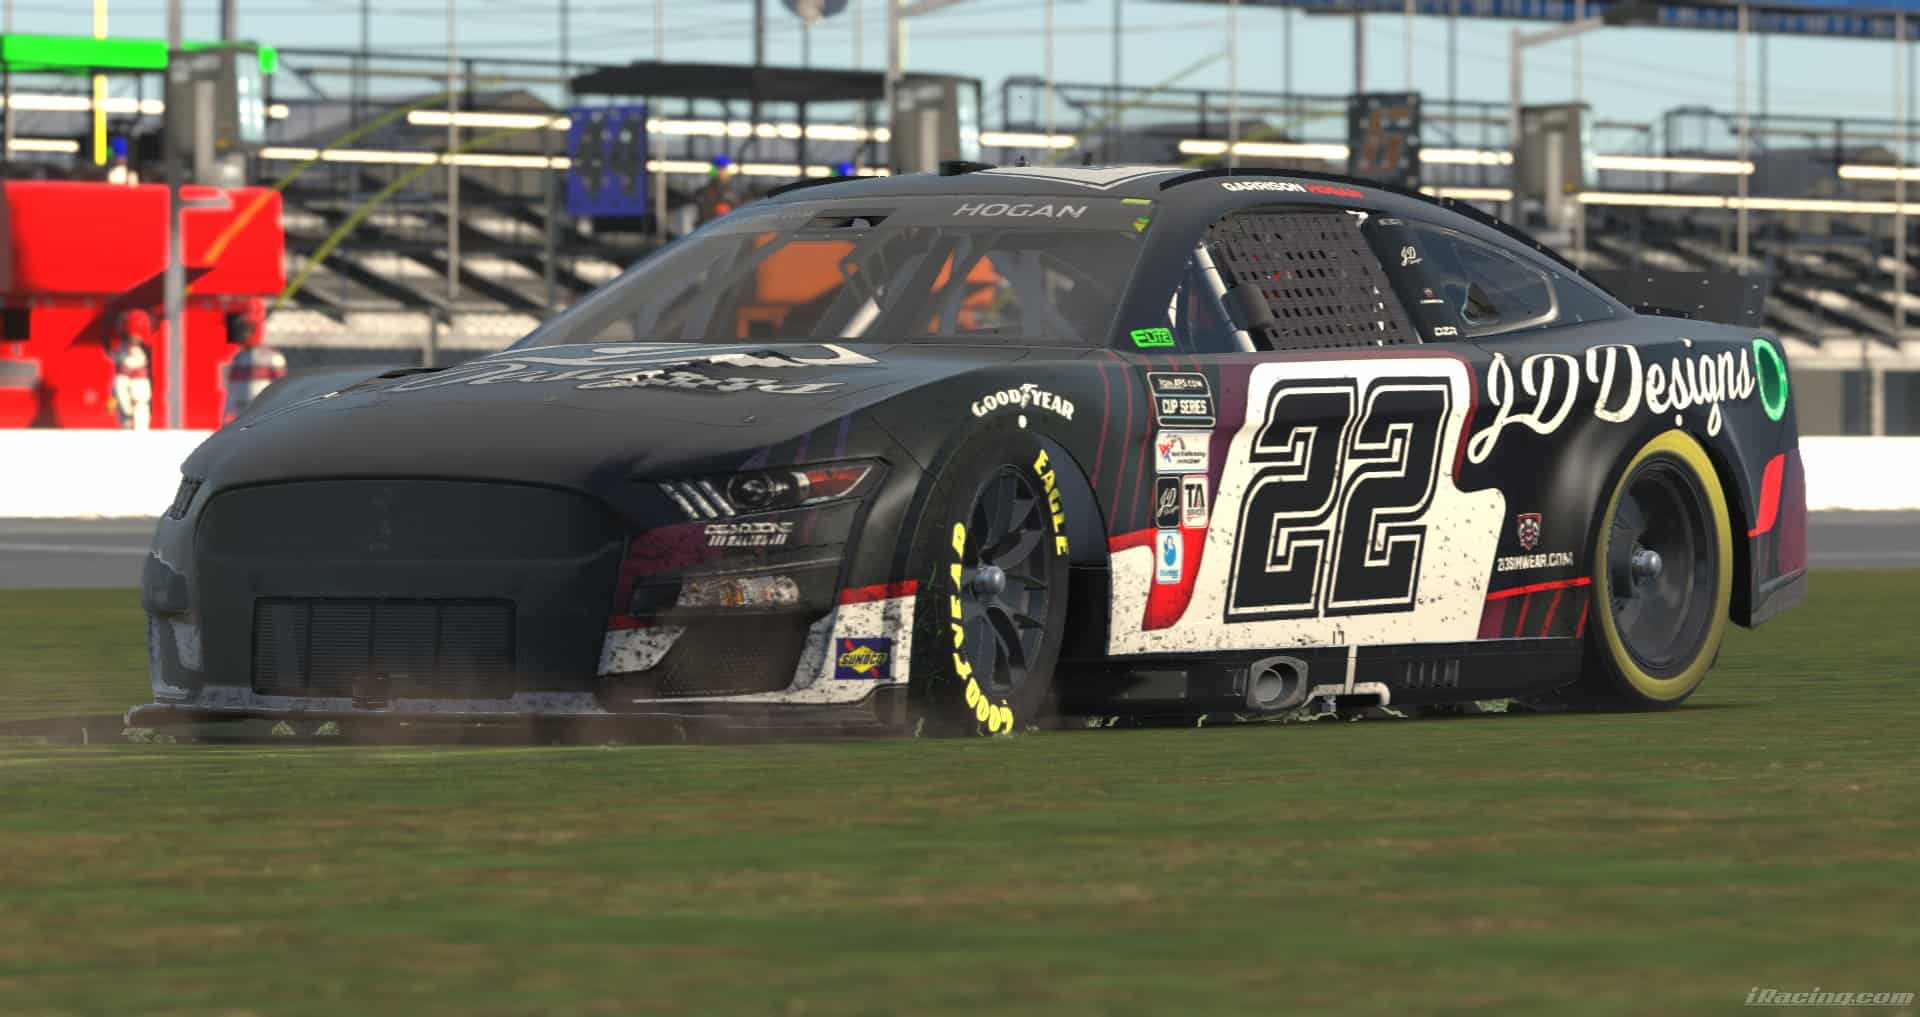 Garrison Hogan survived a wild end to the Elite Racing League's Homeplace Beer Company Daytona 500 to take the victory on iRacing.